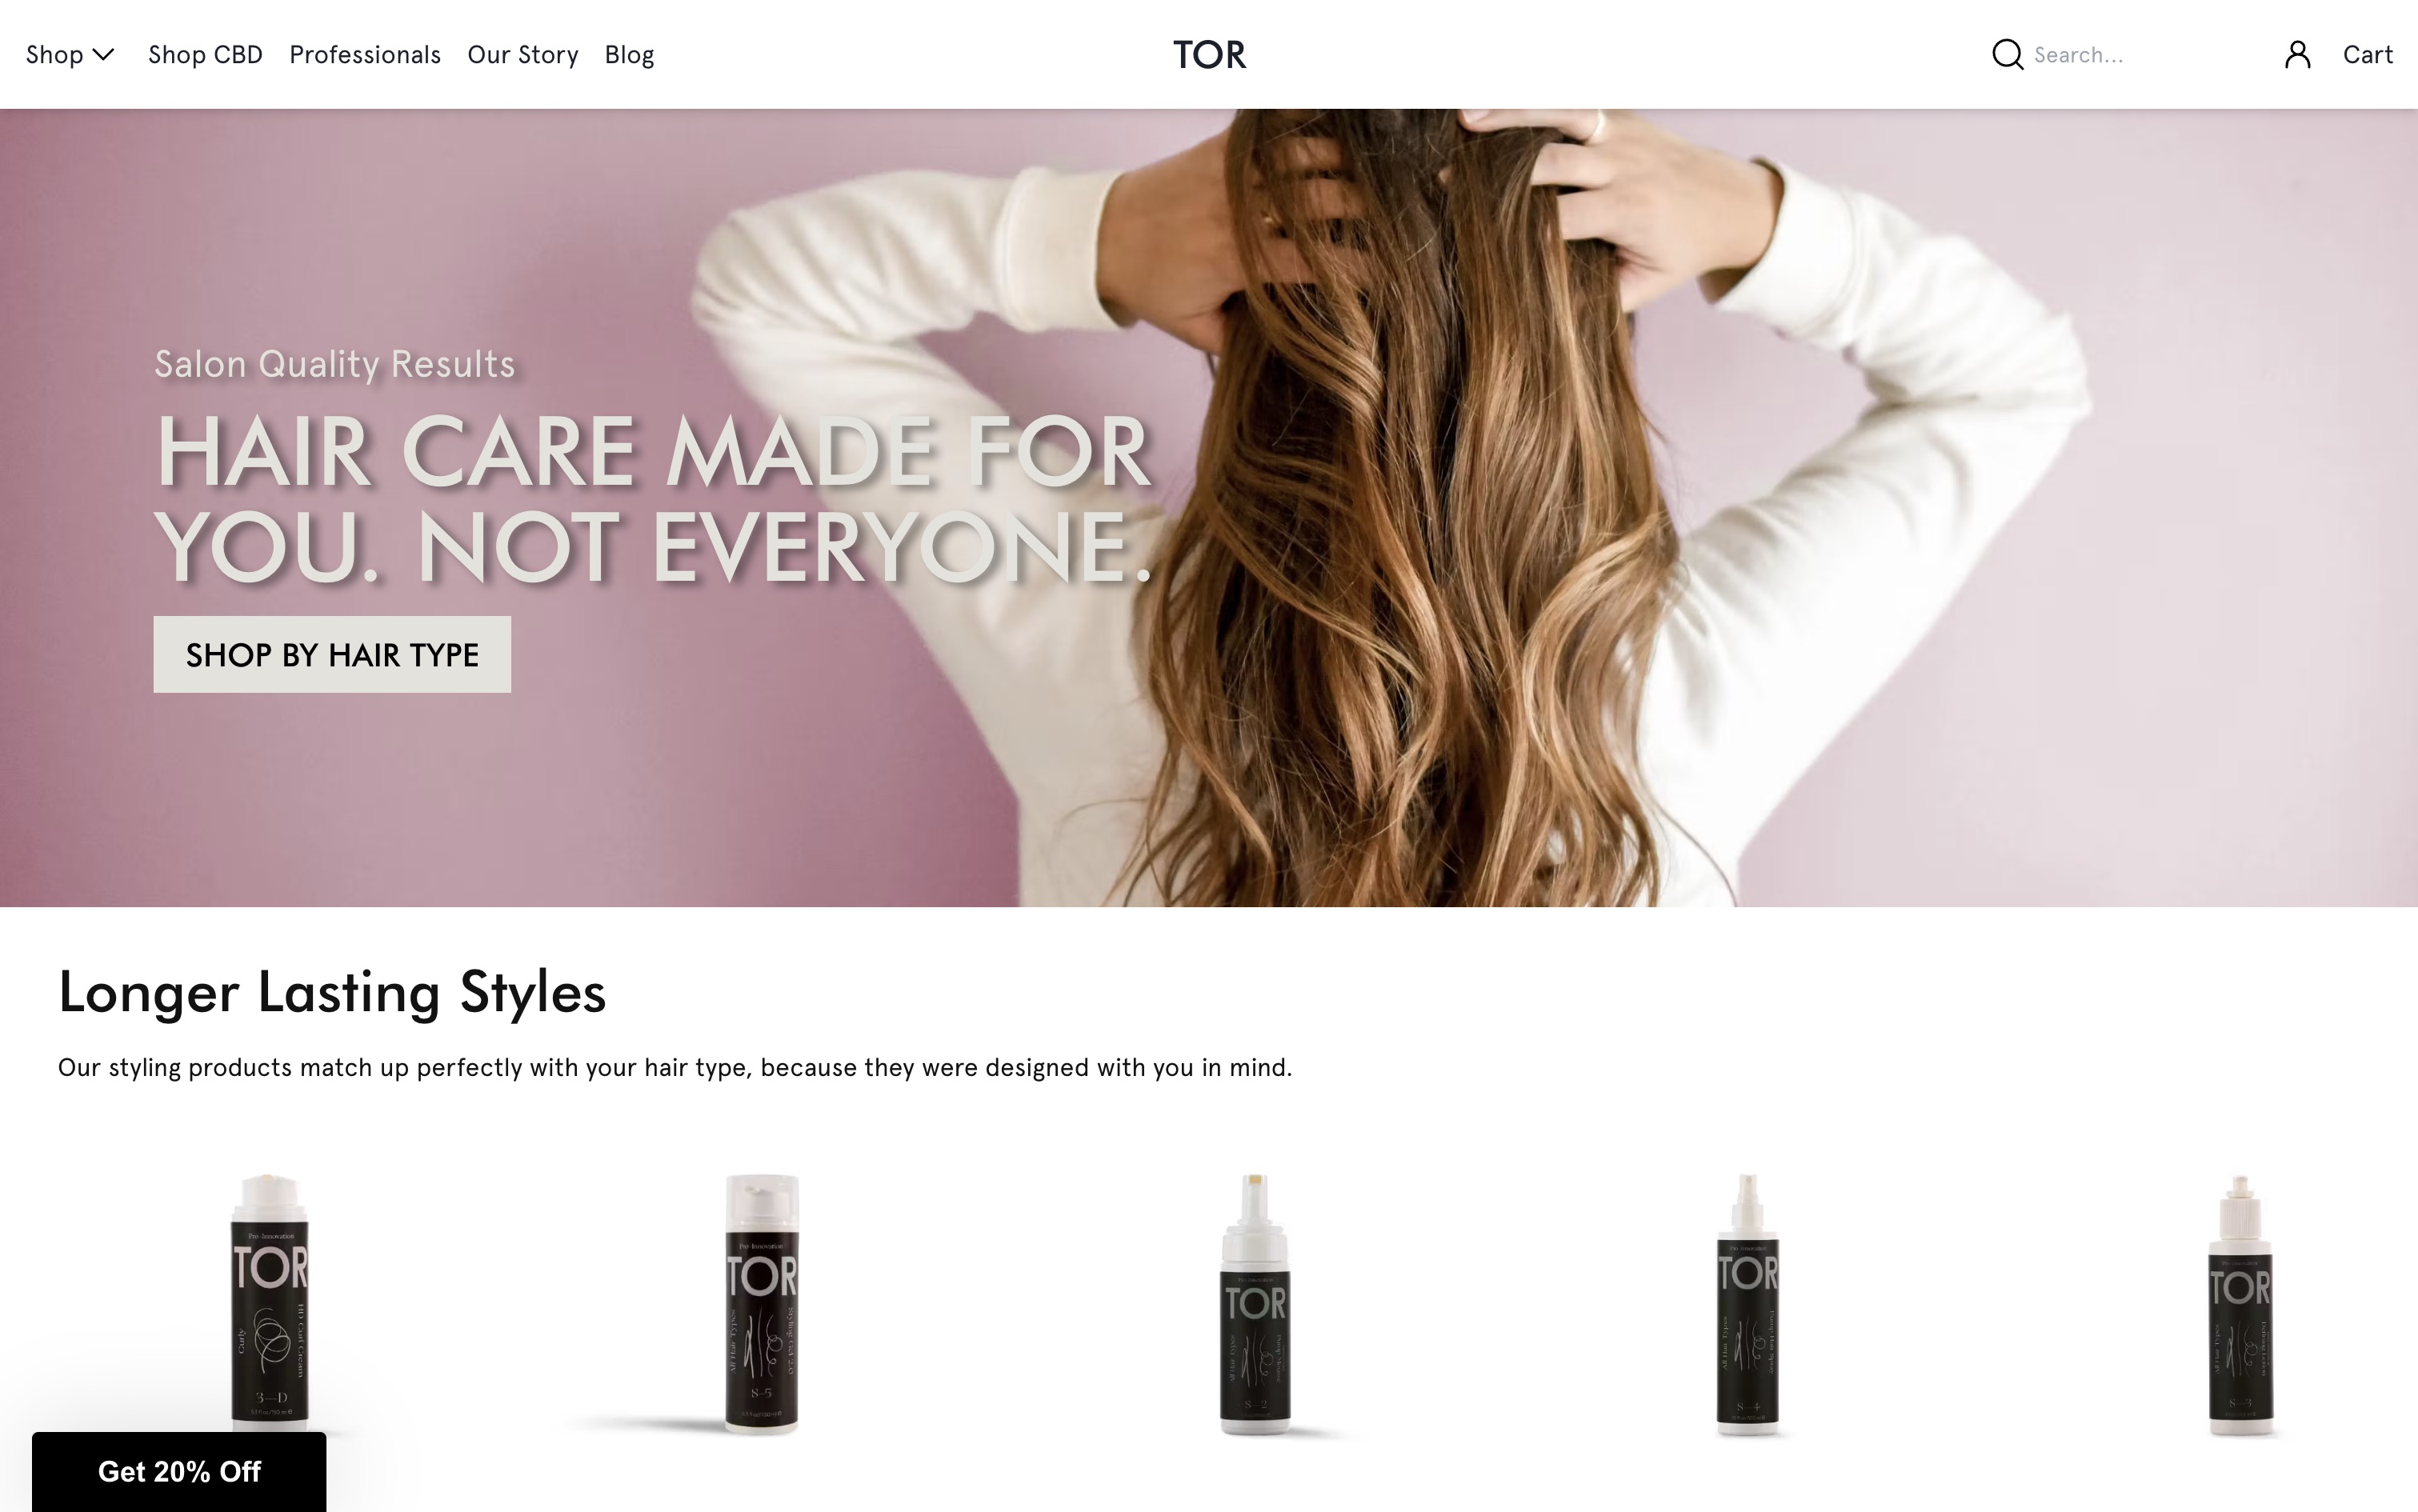 TOR Salon Products